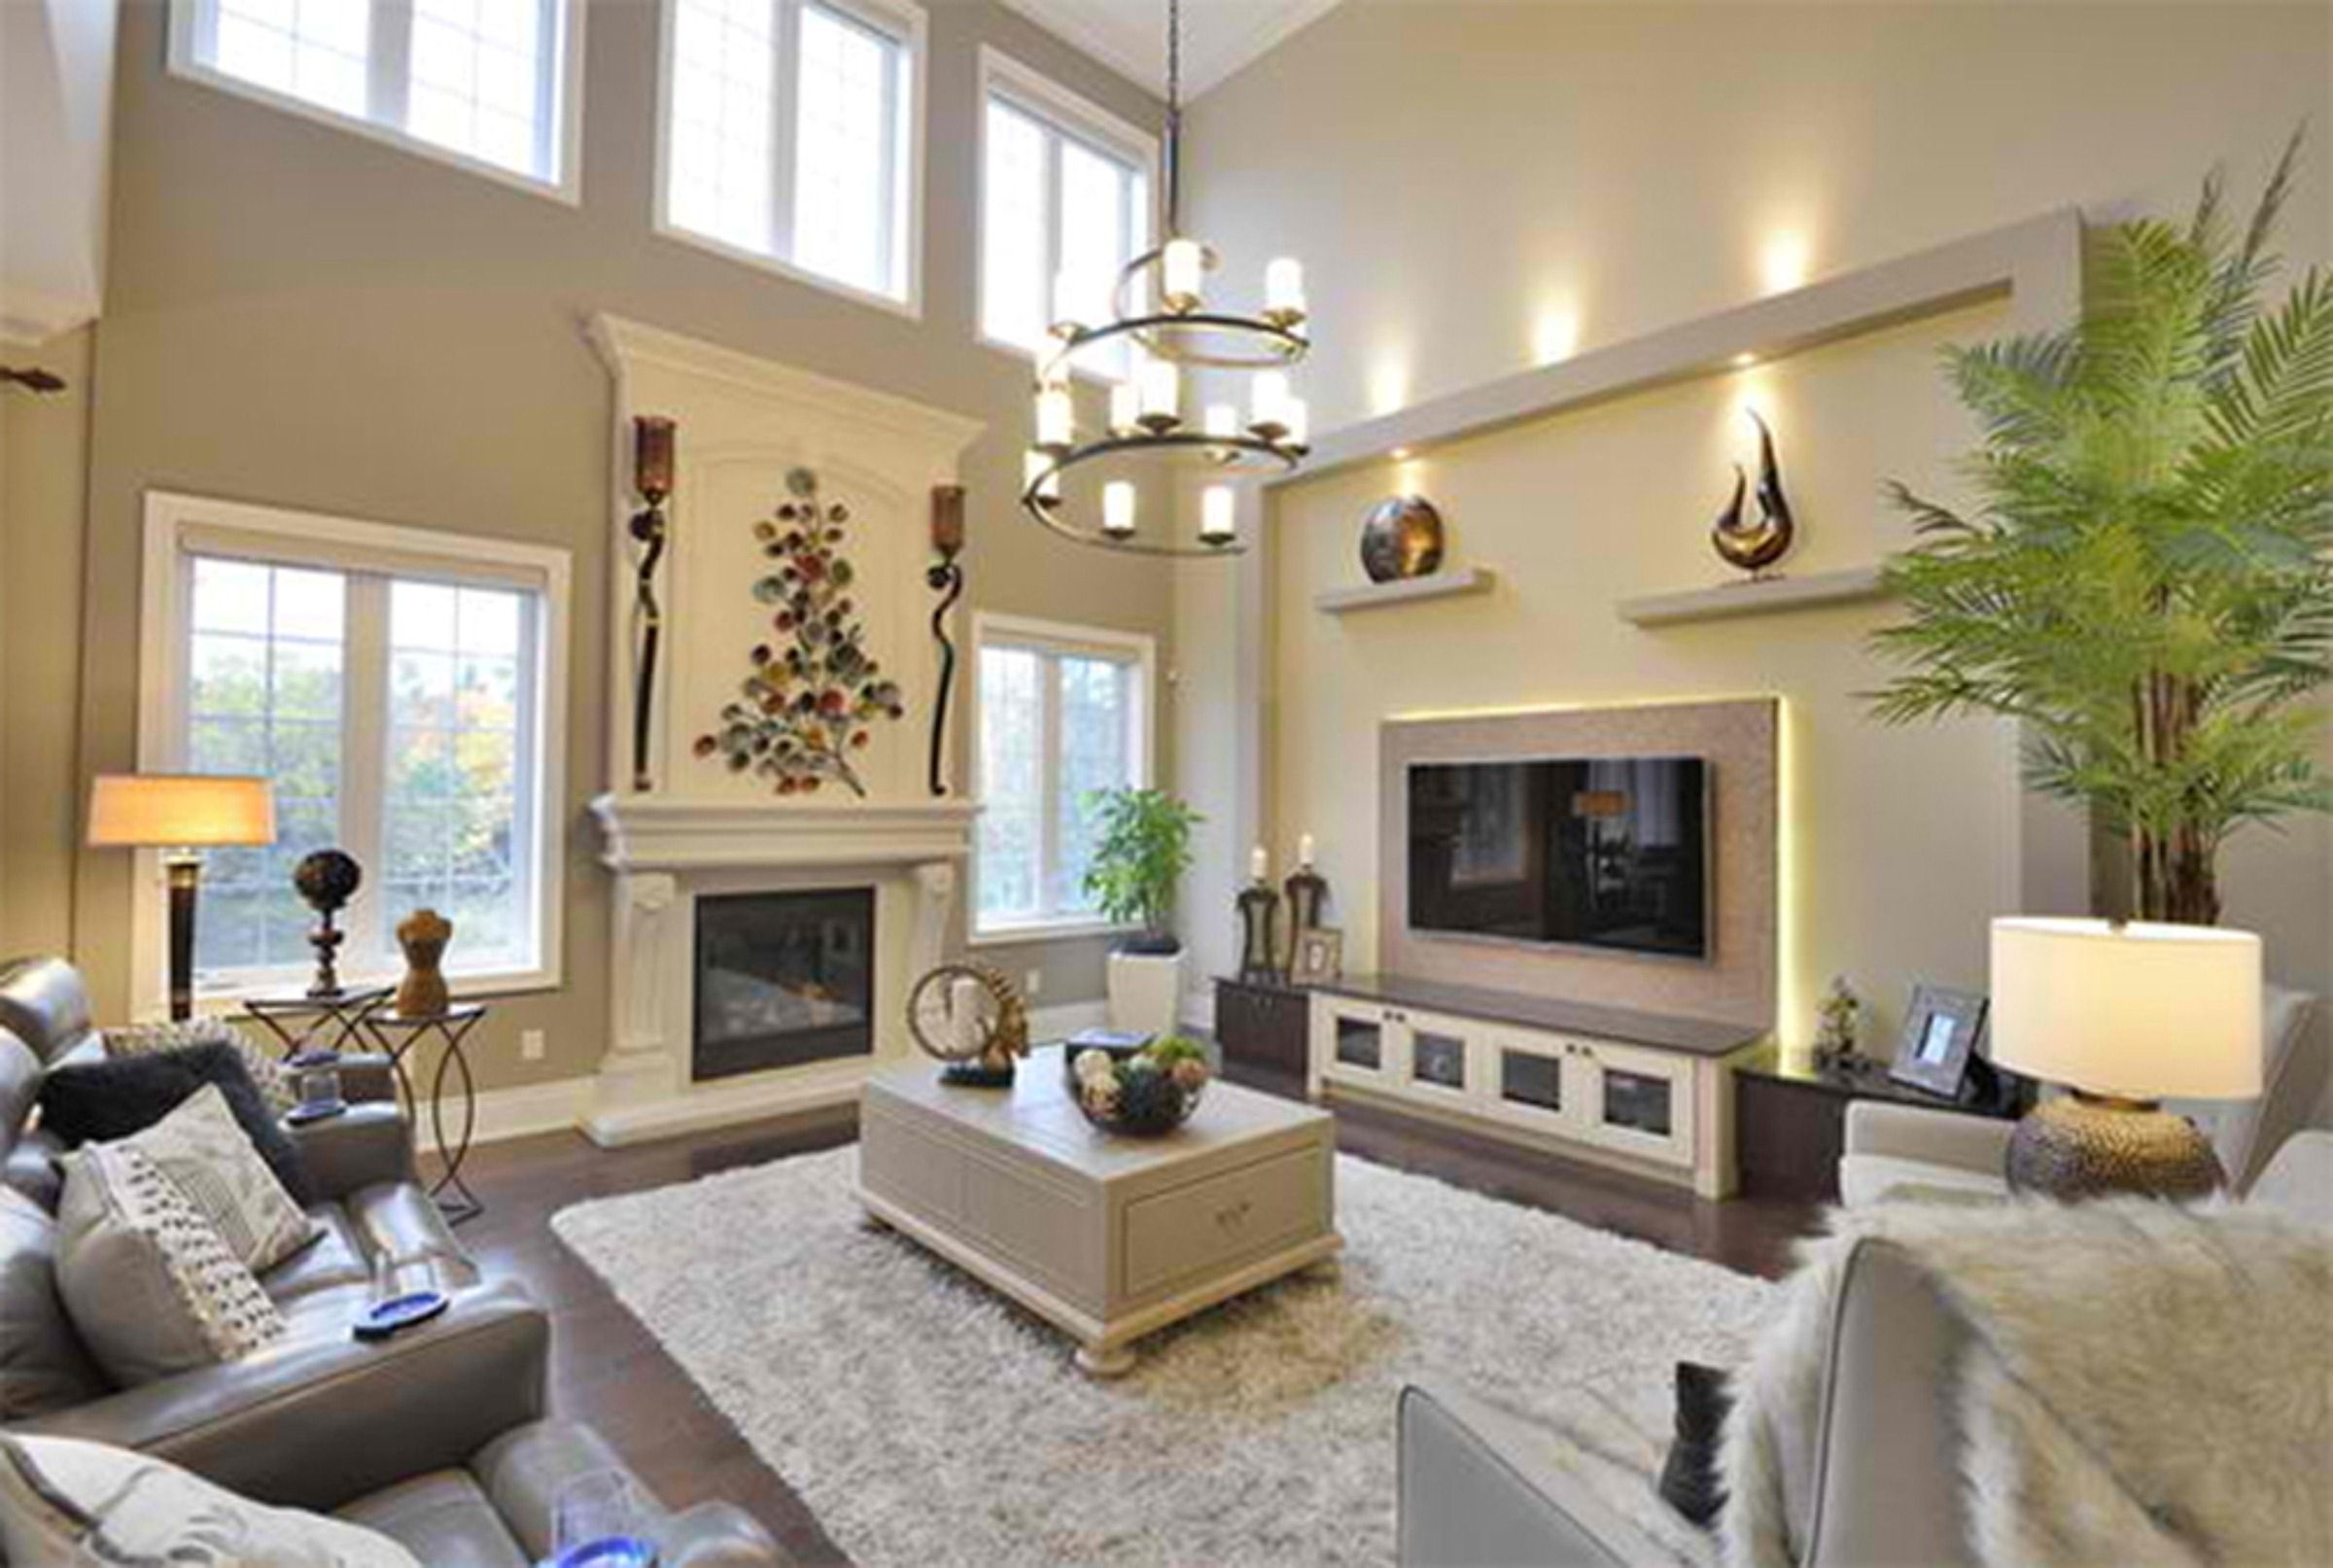 Decorate A Living Room With High Ceilings